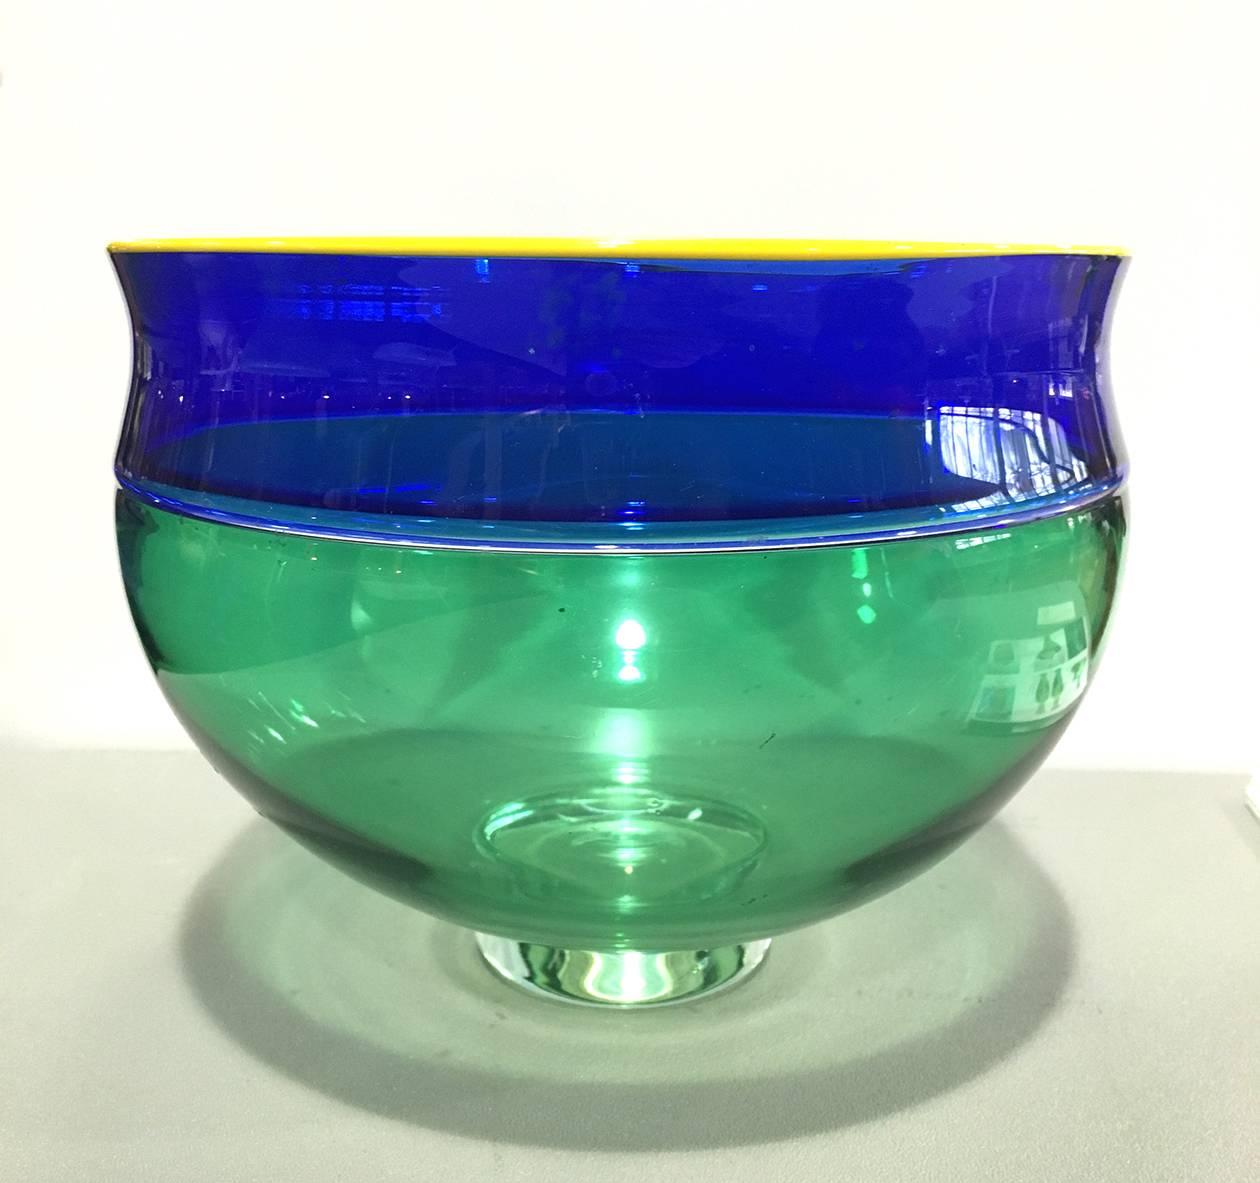 American Alex Brand (B. 1950s) glass Incalmo bowl blue green yellow, 1999

The wide mouth with narrow yellow lip wrap over a waisted blue band, over a pale green bowl, on a cased pale green glass foot. 

Signed, Alex Brand to underside.